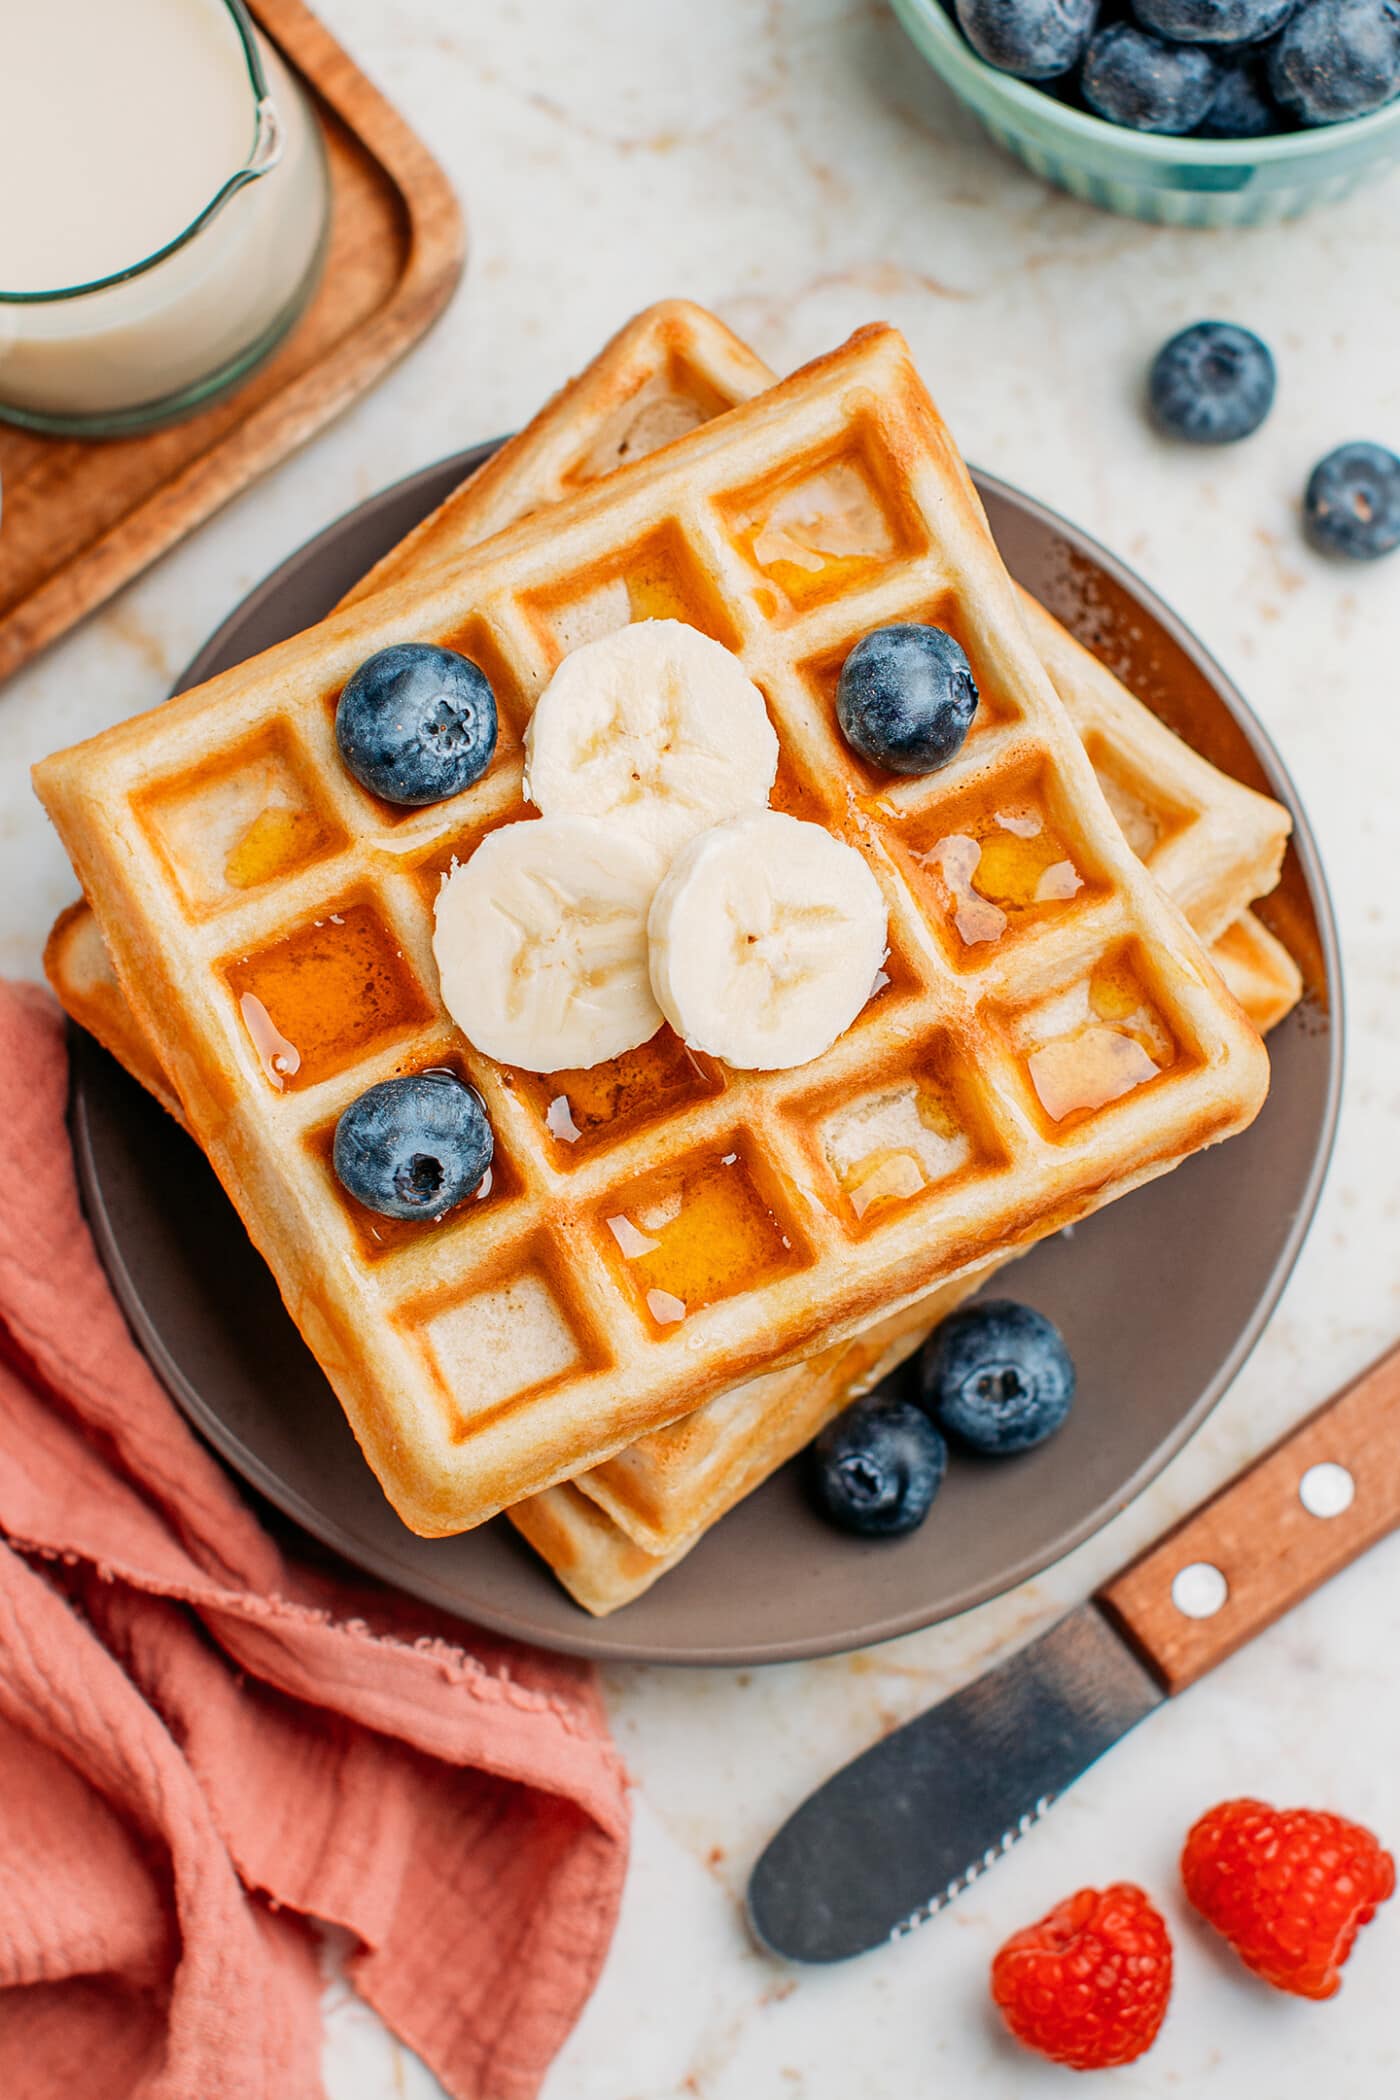 Top view of waffles with bananas and blueberries.